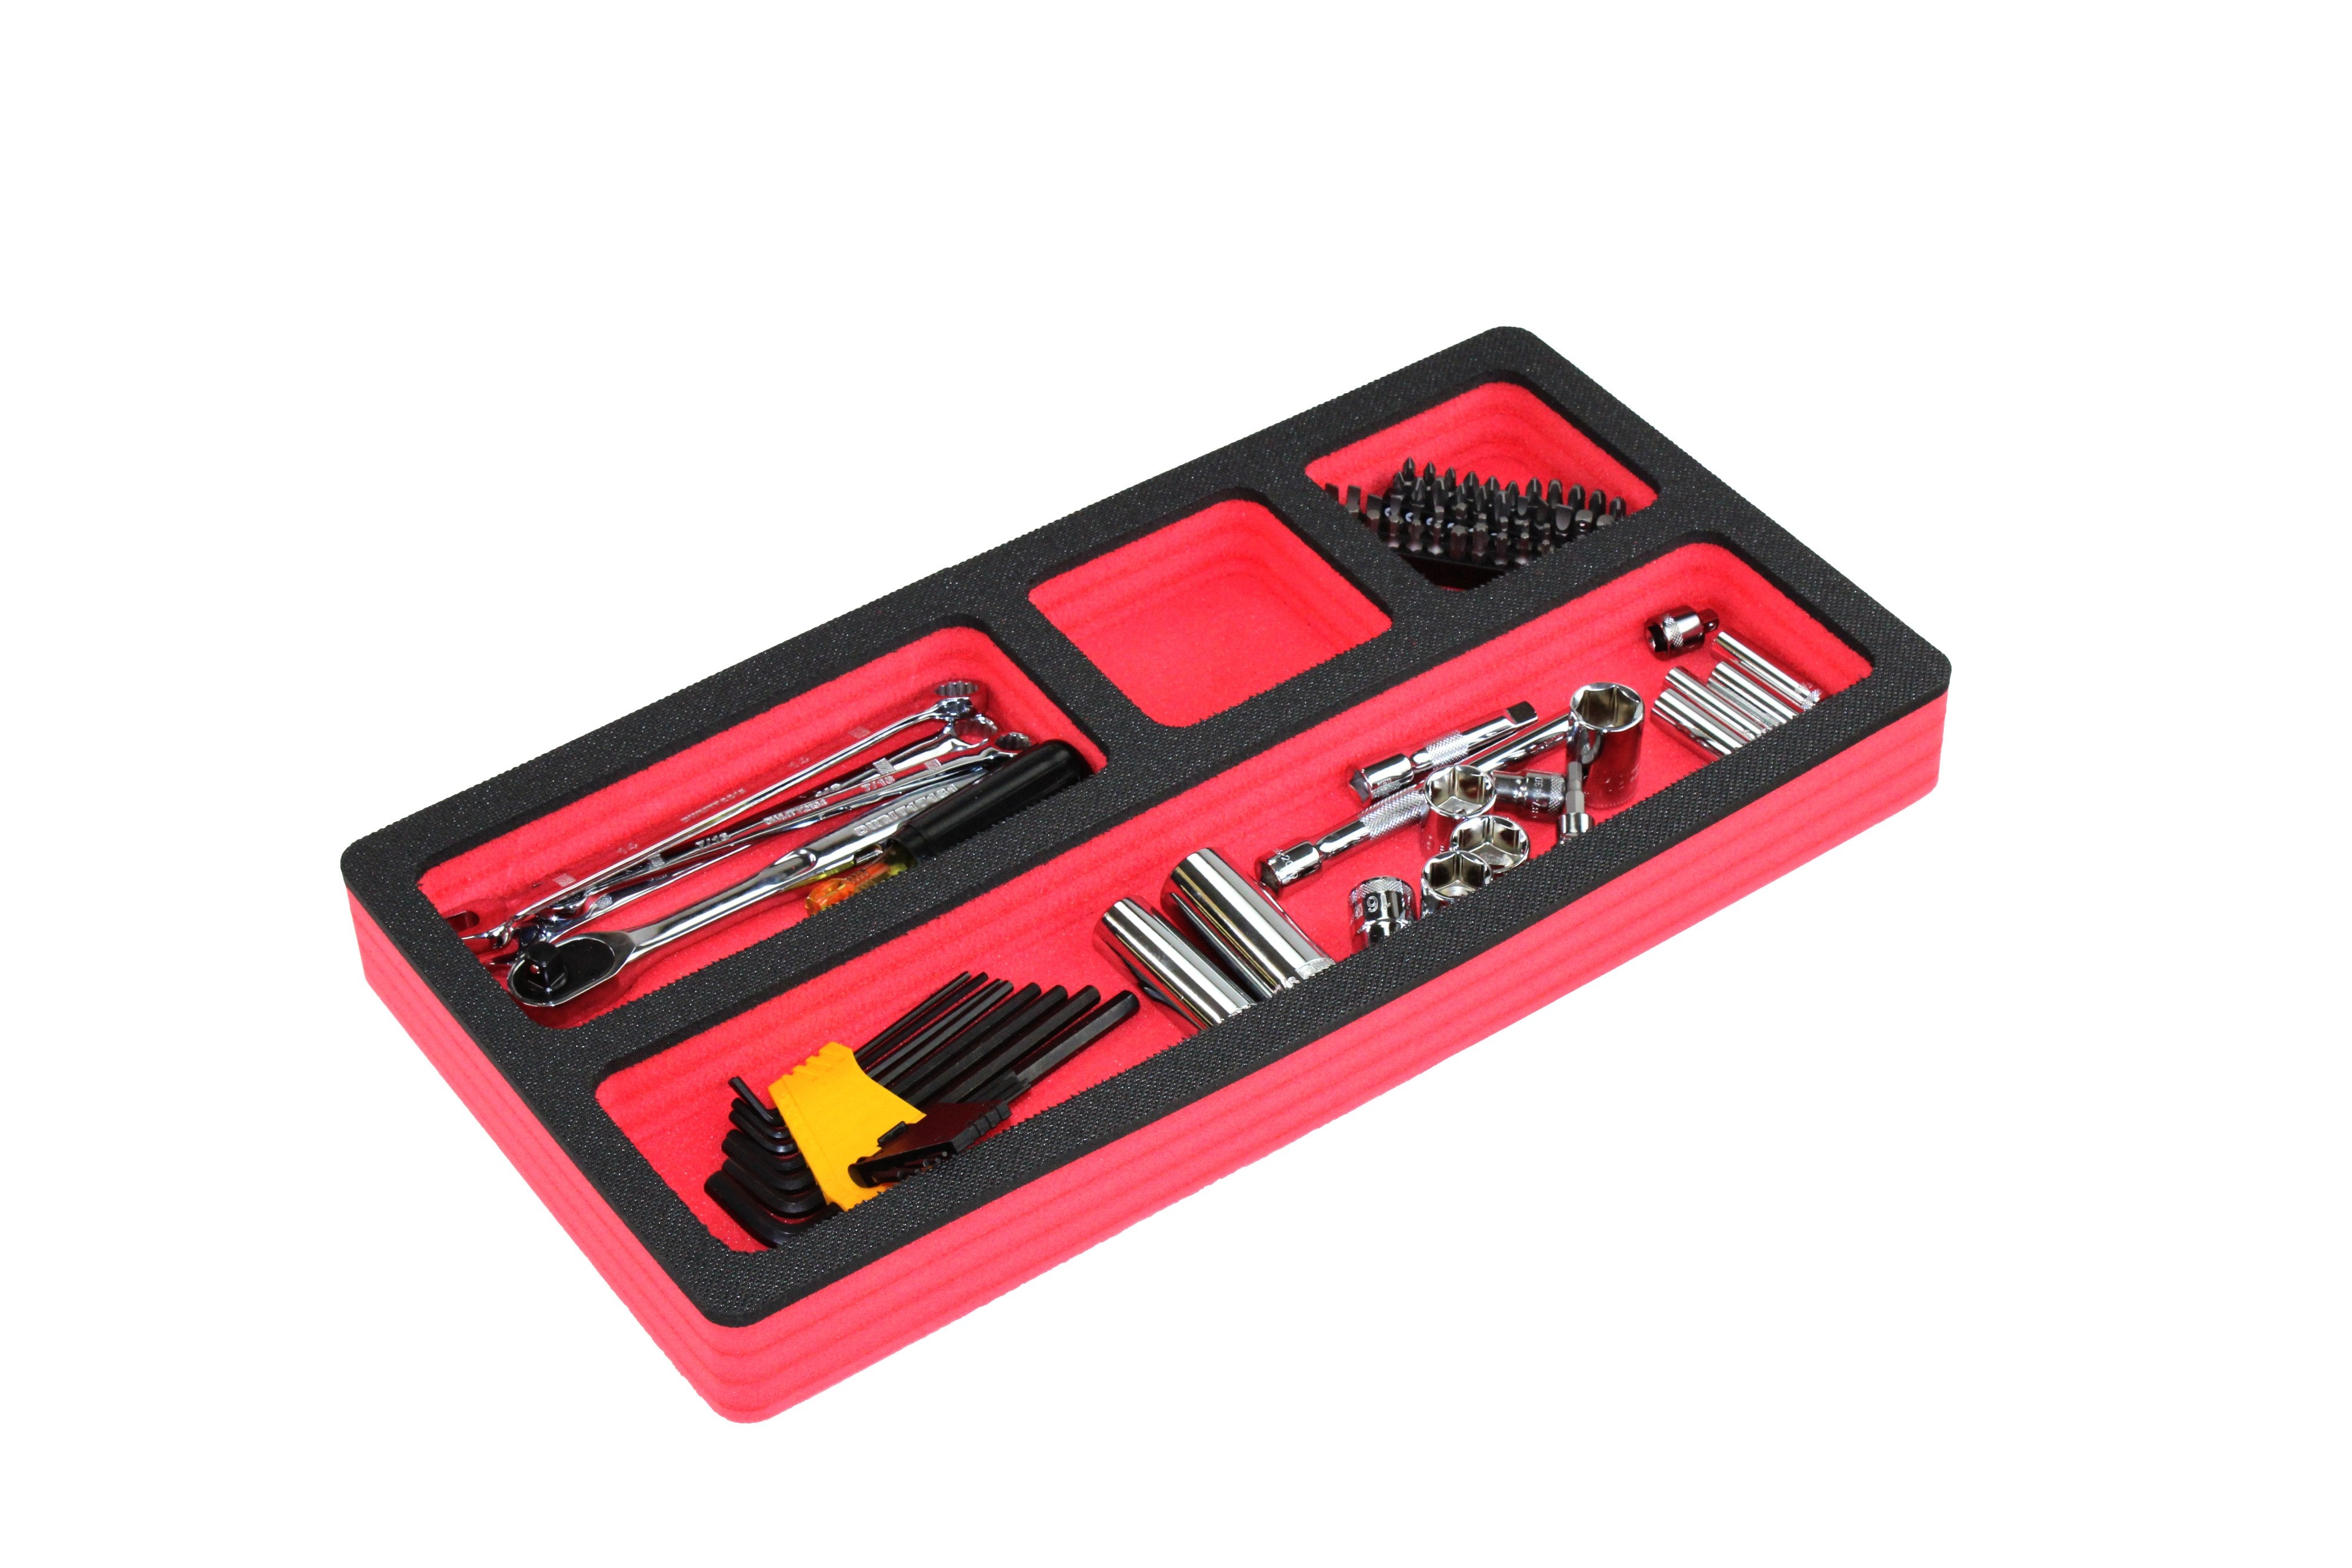 Tool Drawer Organizer Insert Red and Black Durable Foam Strong Non-Slip Anti-Rattle Bin Holder Tray 20 x 10 Inches 4 Pockets Fits Craftsman Husky Kobalt Milwaukee and Many Others